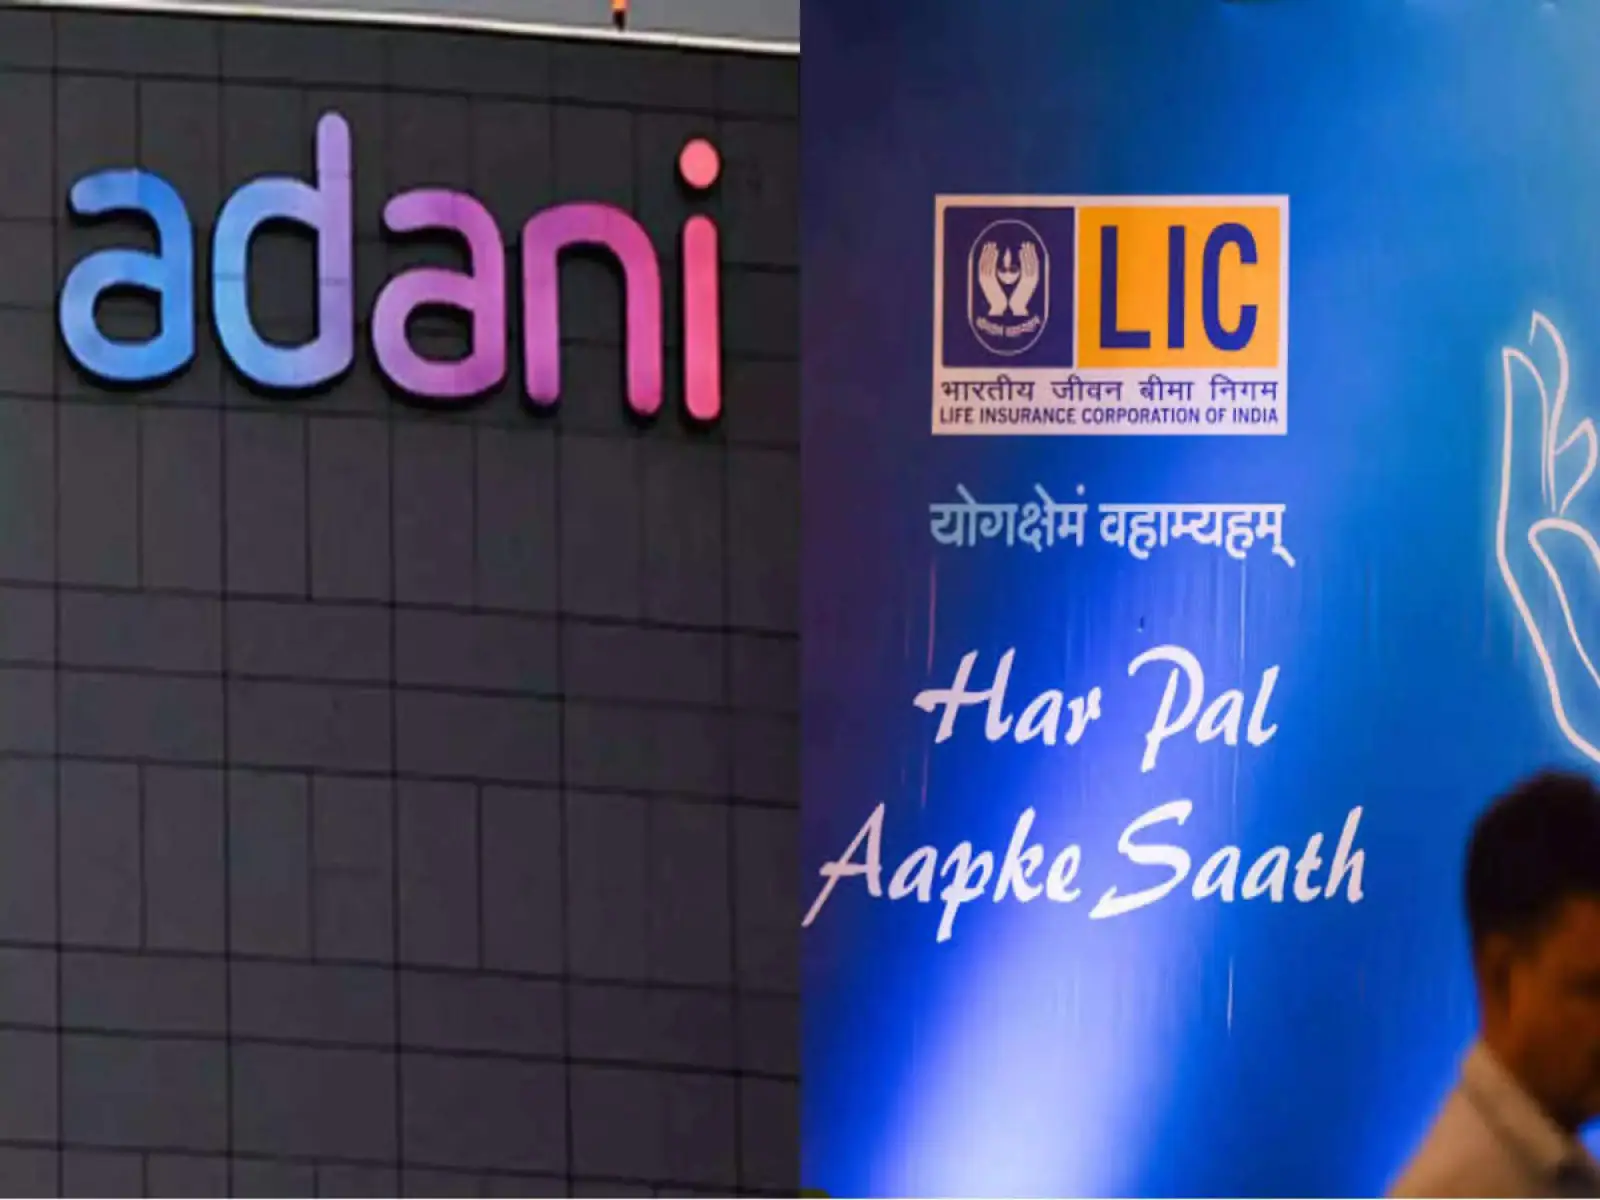 Adani Group shares recovered from the dark shadow of Hindenburg, filled the coffers of LIC, gave profit of so many crores